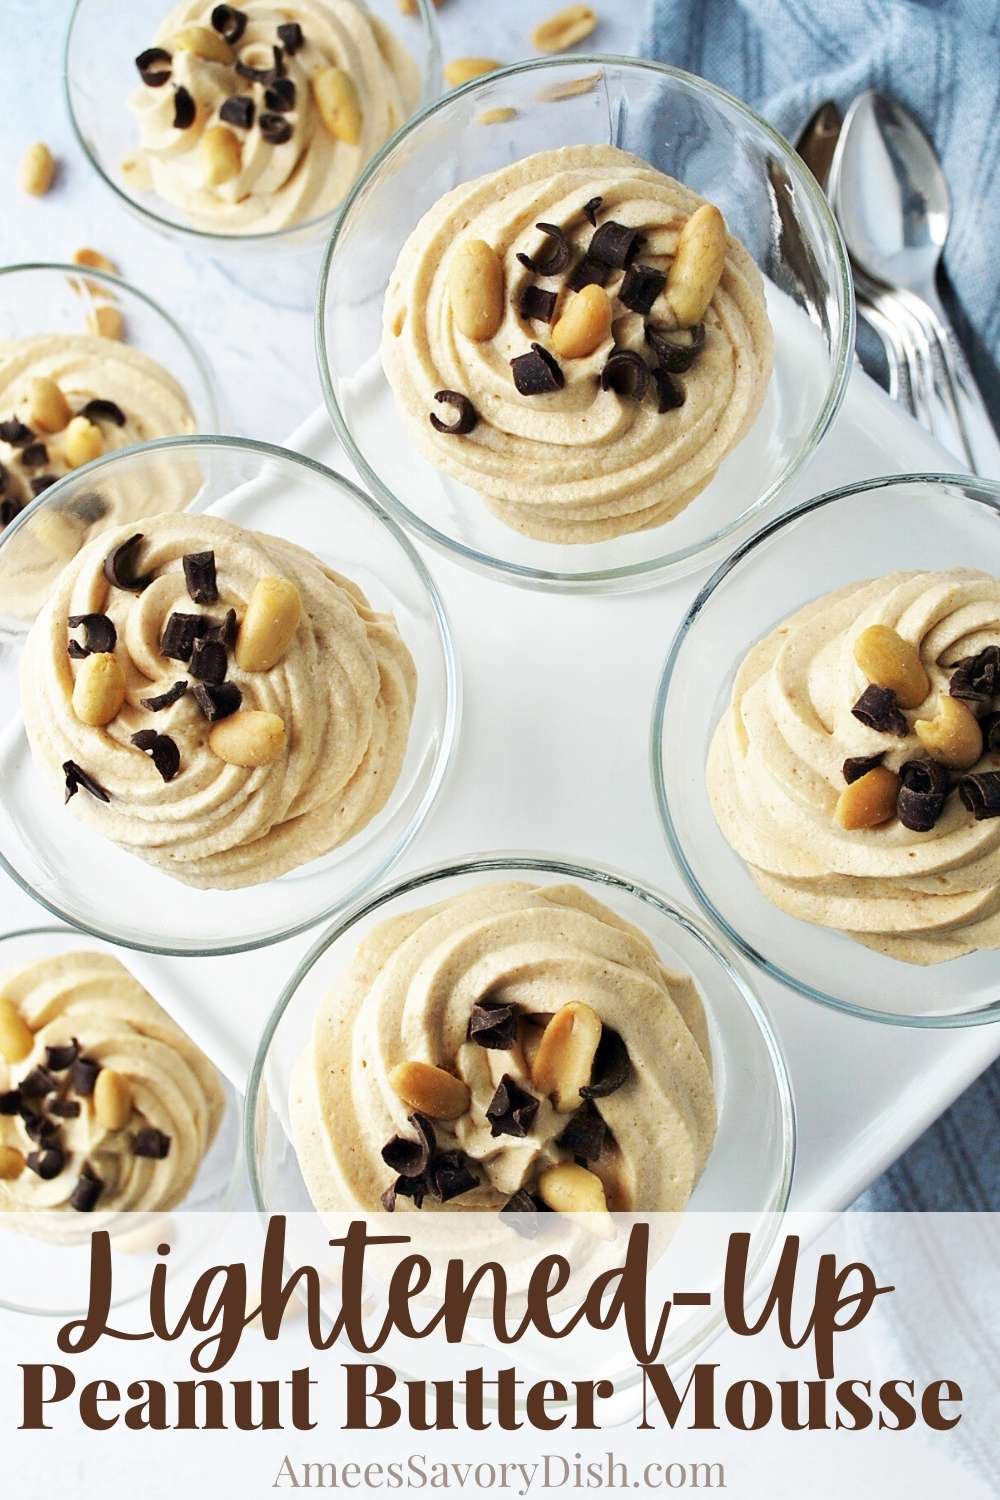 This easy recipe for Light Peanut Butter Mousse combines creamy peanut butter, mascarpone cheese, powdered sugar, and fluffy whipped topping for a delicious dessert that's ready in under 10 minutes! via @Ameessavorydish